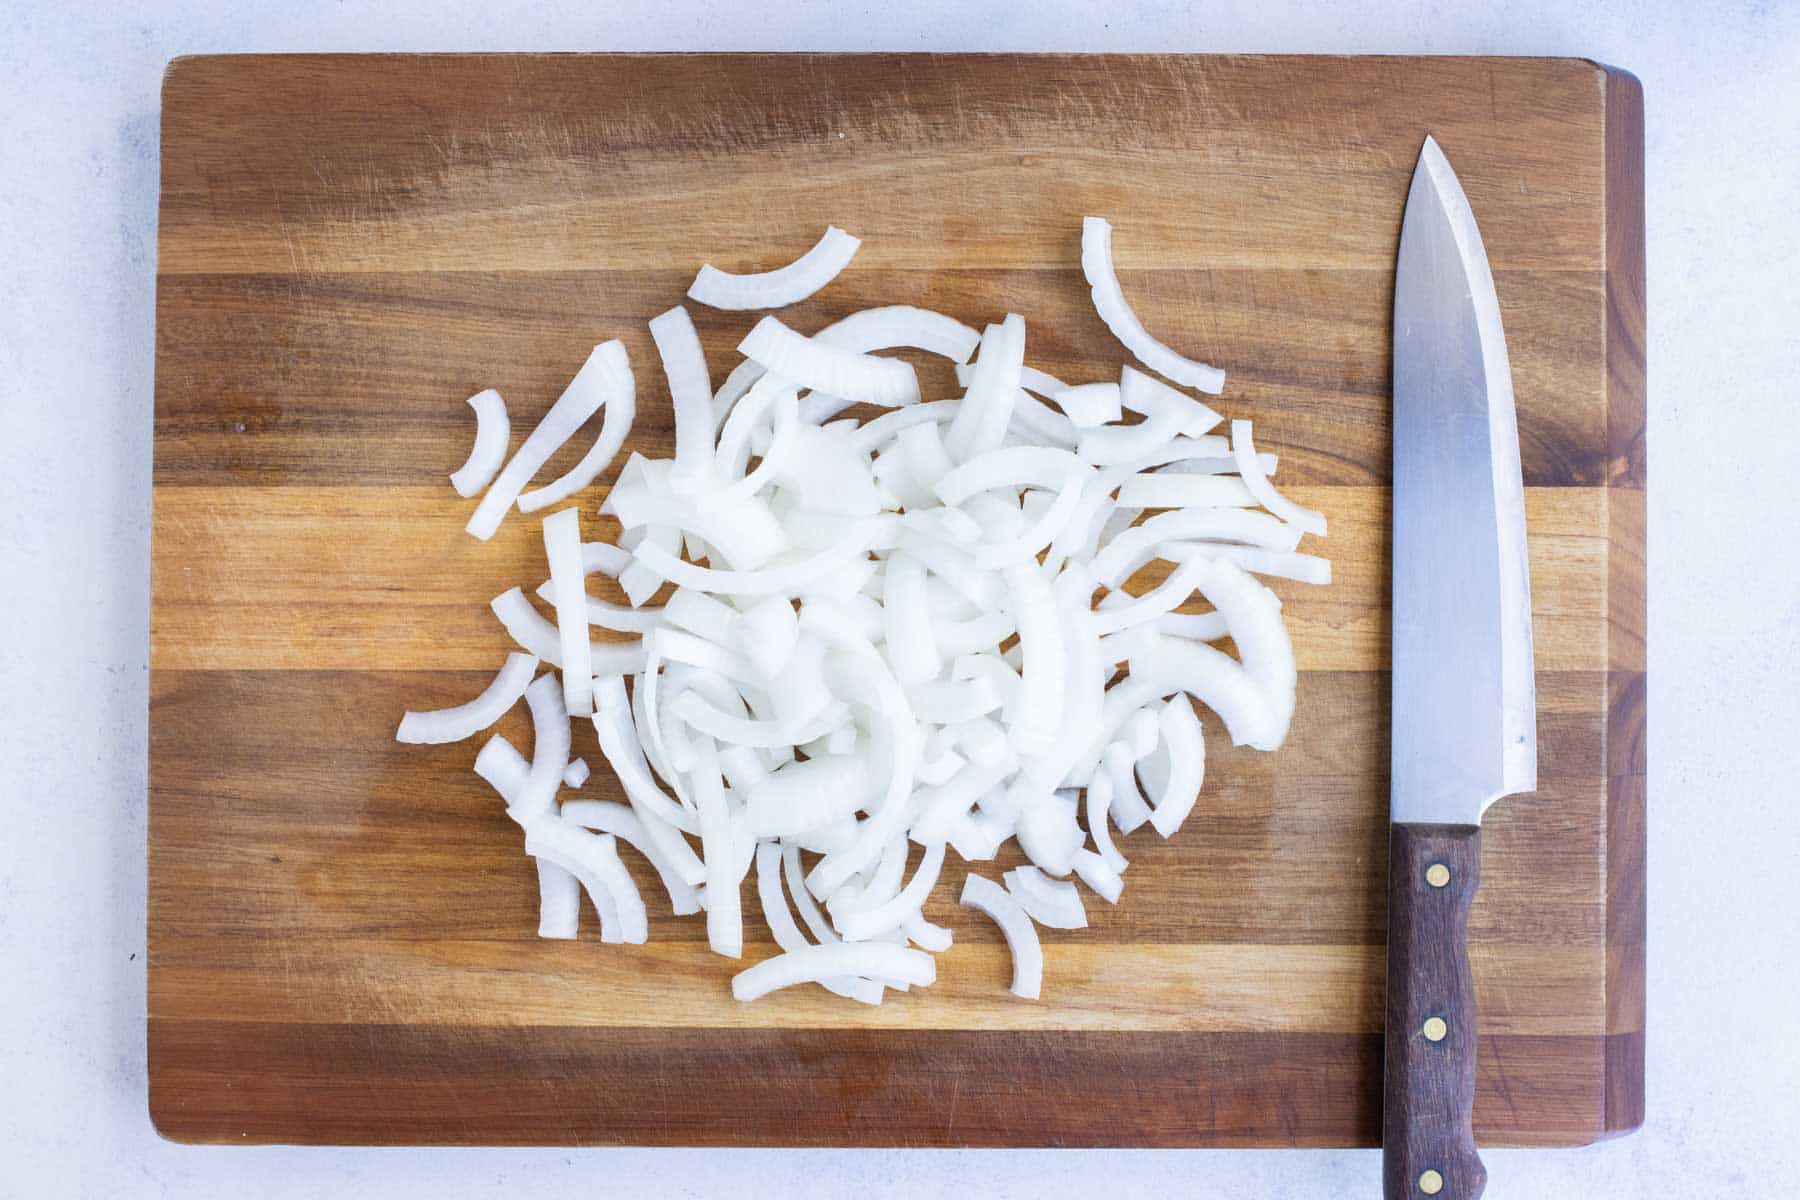 Thinly sliced onions are ready to make fried onion strings with.